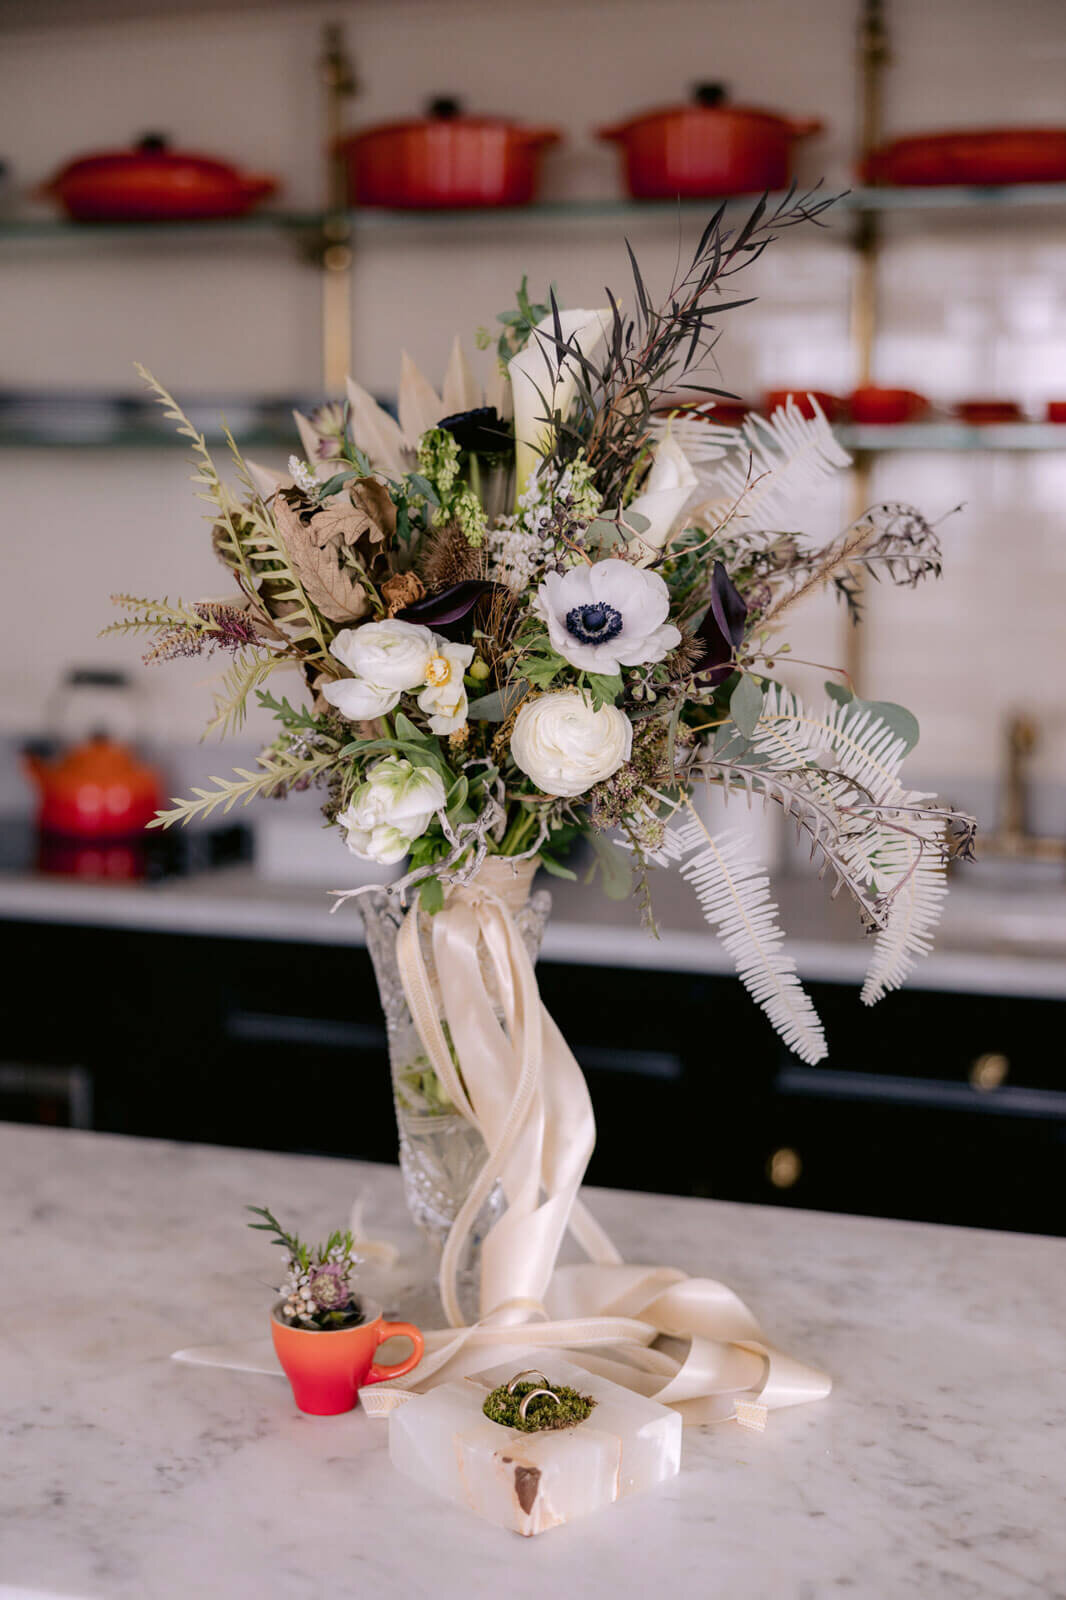 A bouquet of flowers in a glass vase on a kitchen countertop